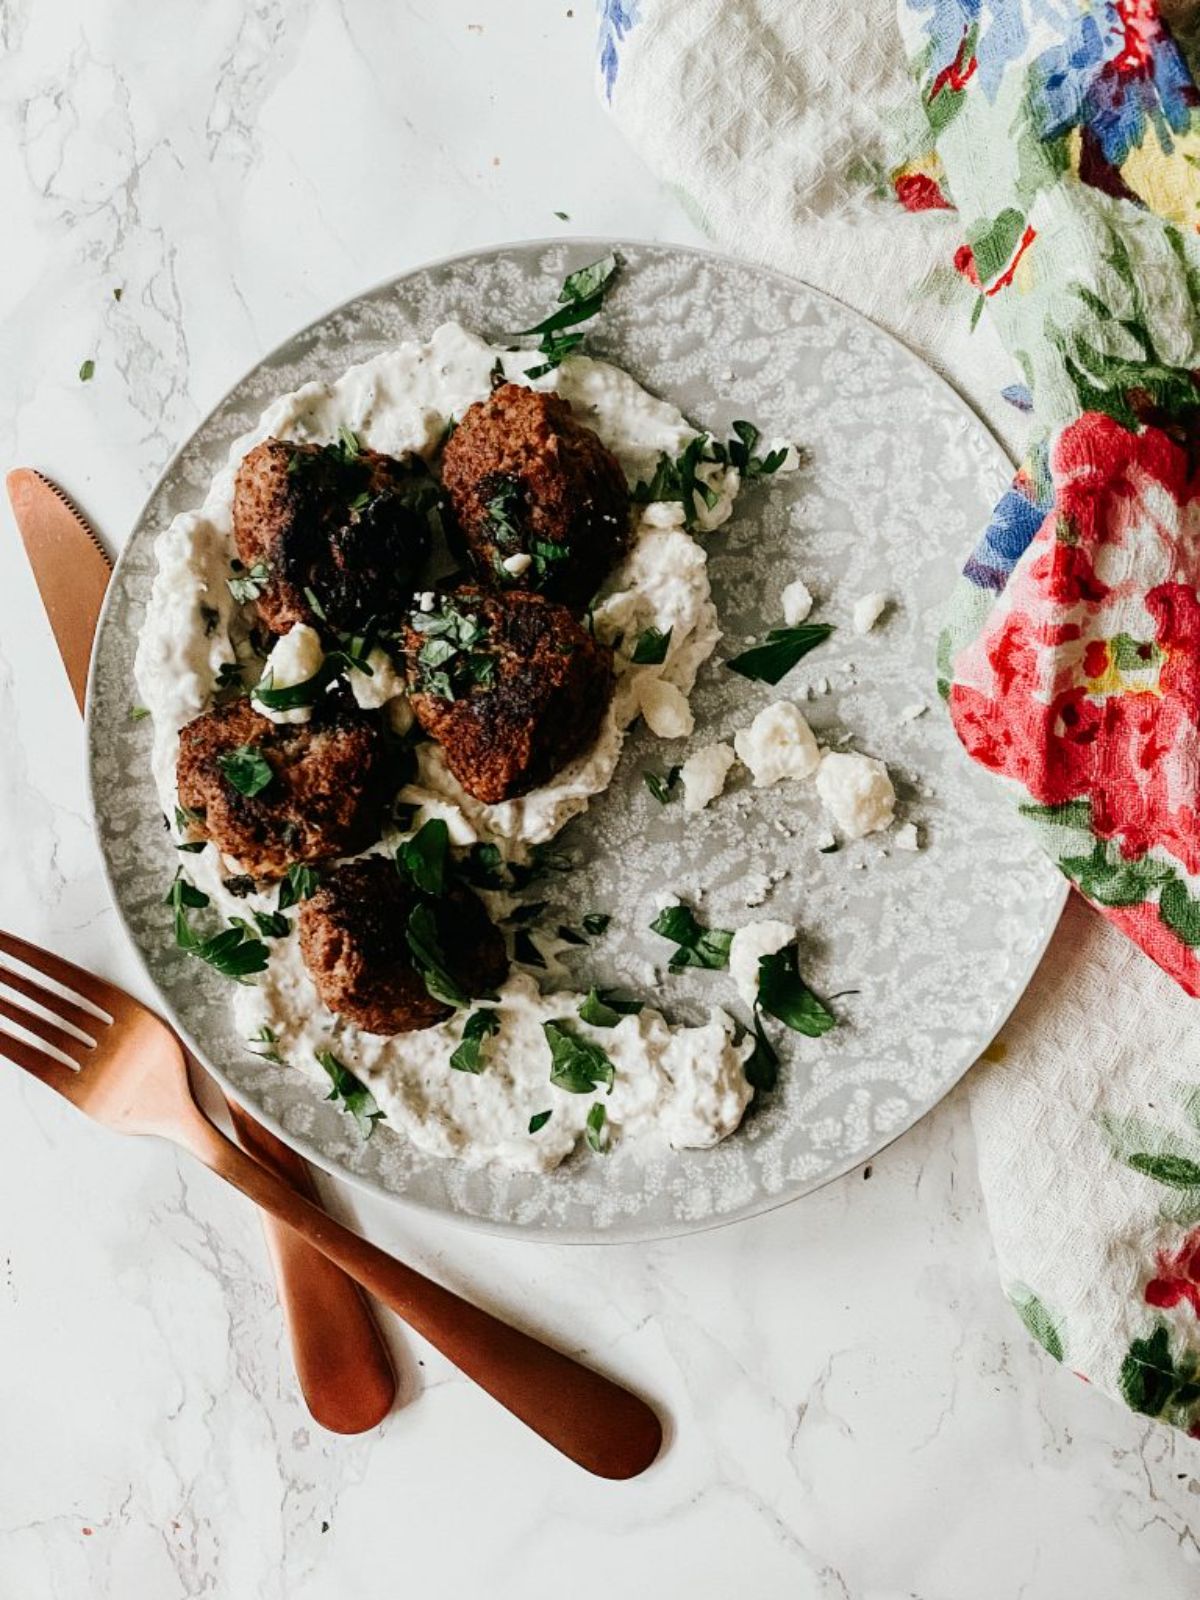 Scrumptious greek bison meatballs on a gray plate.